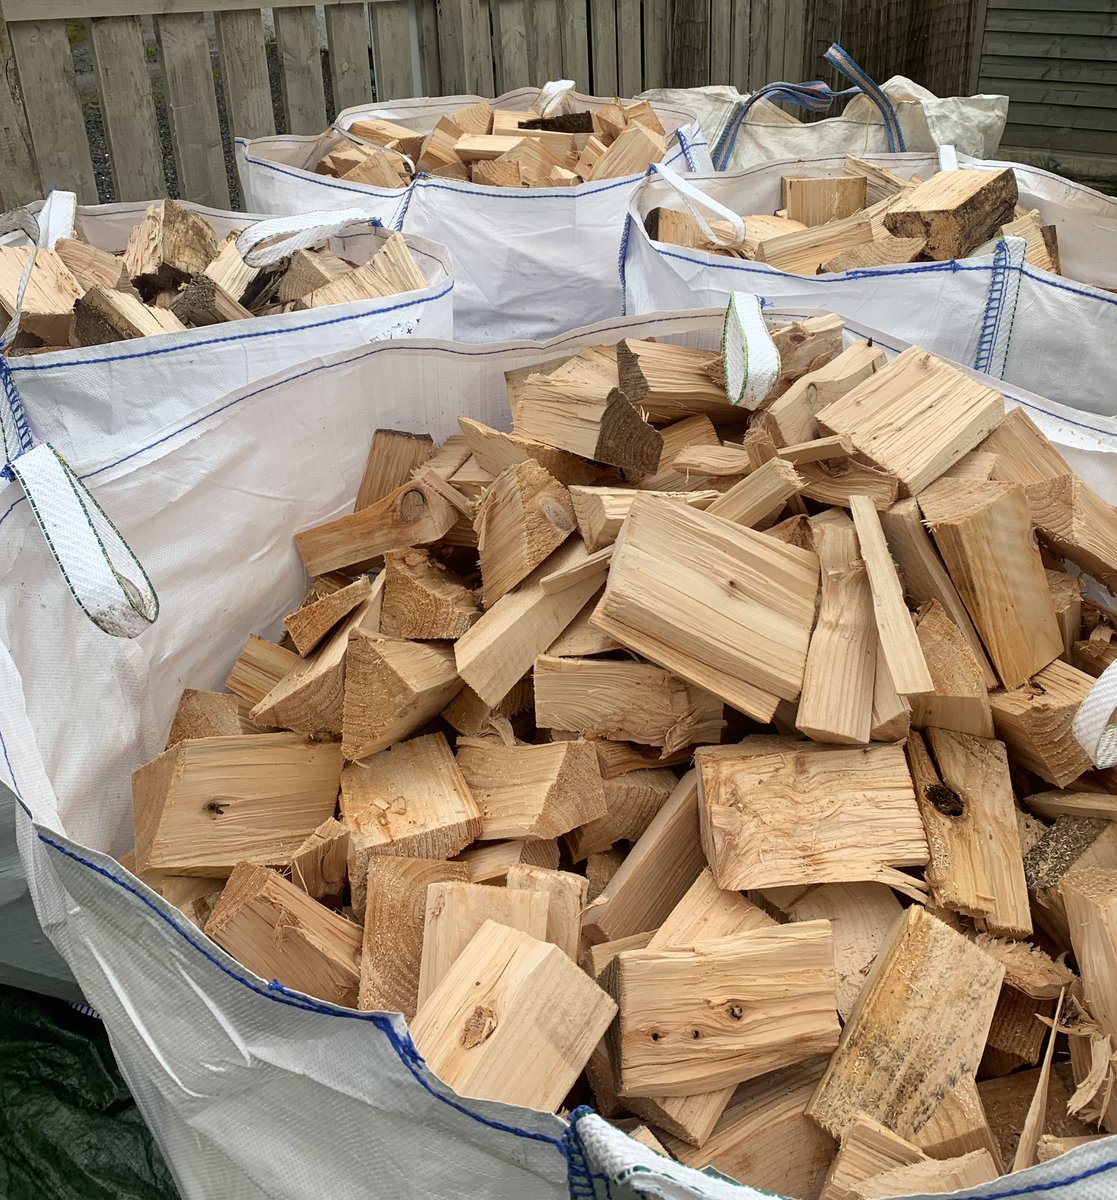 Preparations for winter start early around here. Just had our annual wood delivery from Bute Saw Mil. Now stacked away to season for the coming winter #woodburningstove #winterprep